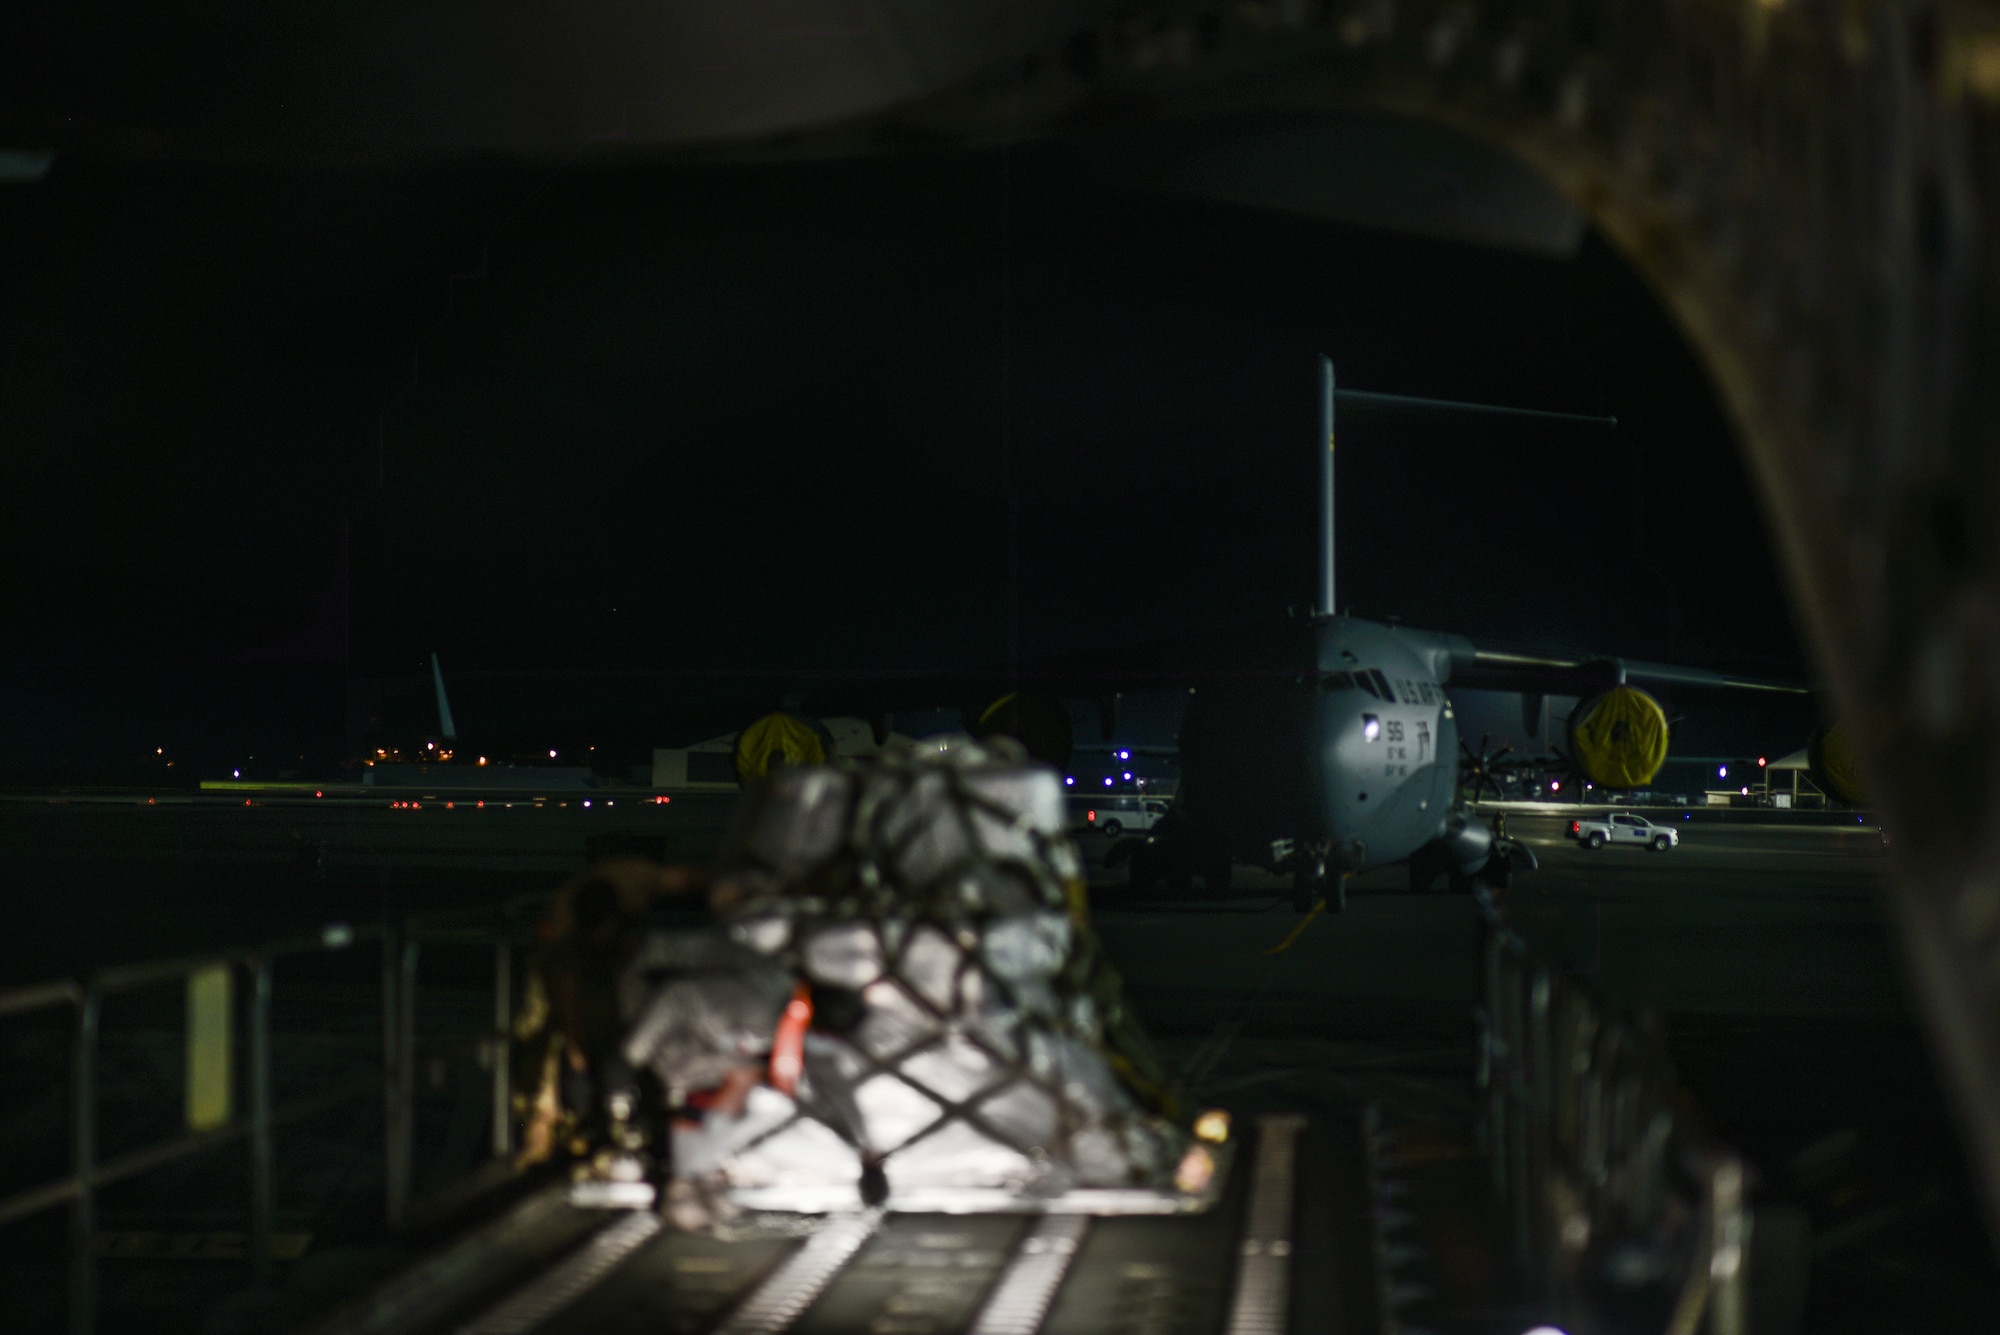 U.S. Air Force Airmen and civilians with the 735th Air Mobility Squadron load COVID-19 personal protective equipment and medical supplies from a Tunner 60K loader onto a C-17 Globemaster III from the 535th Airlift Squadron at Joint Base Pearl Harbor-Hickam, Hawaii, April  3, 2020. With a 72-hour notification, the 735th AMS loaded 31,063 pounds of cargo in support of the COVID-19 response.  (U.S. Air Force photo by Tech. Sgt. Anthony Nelson Jr.)